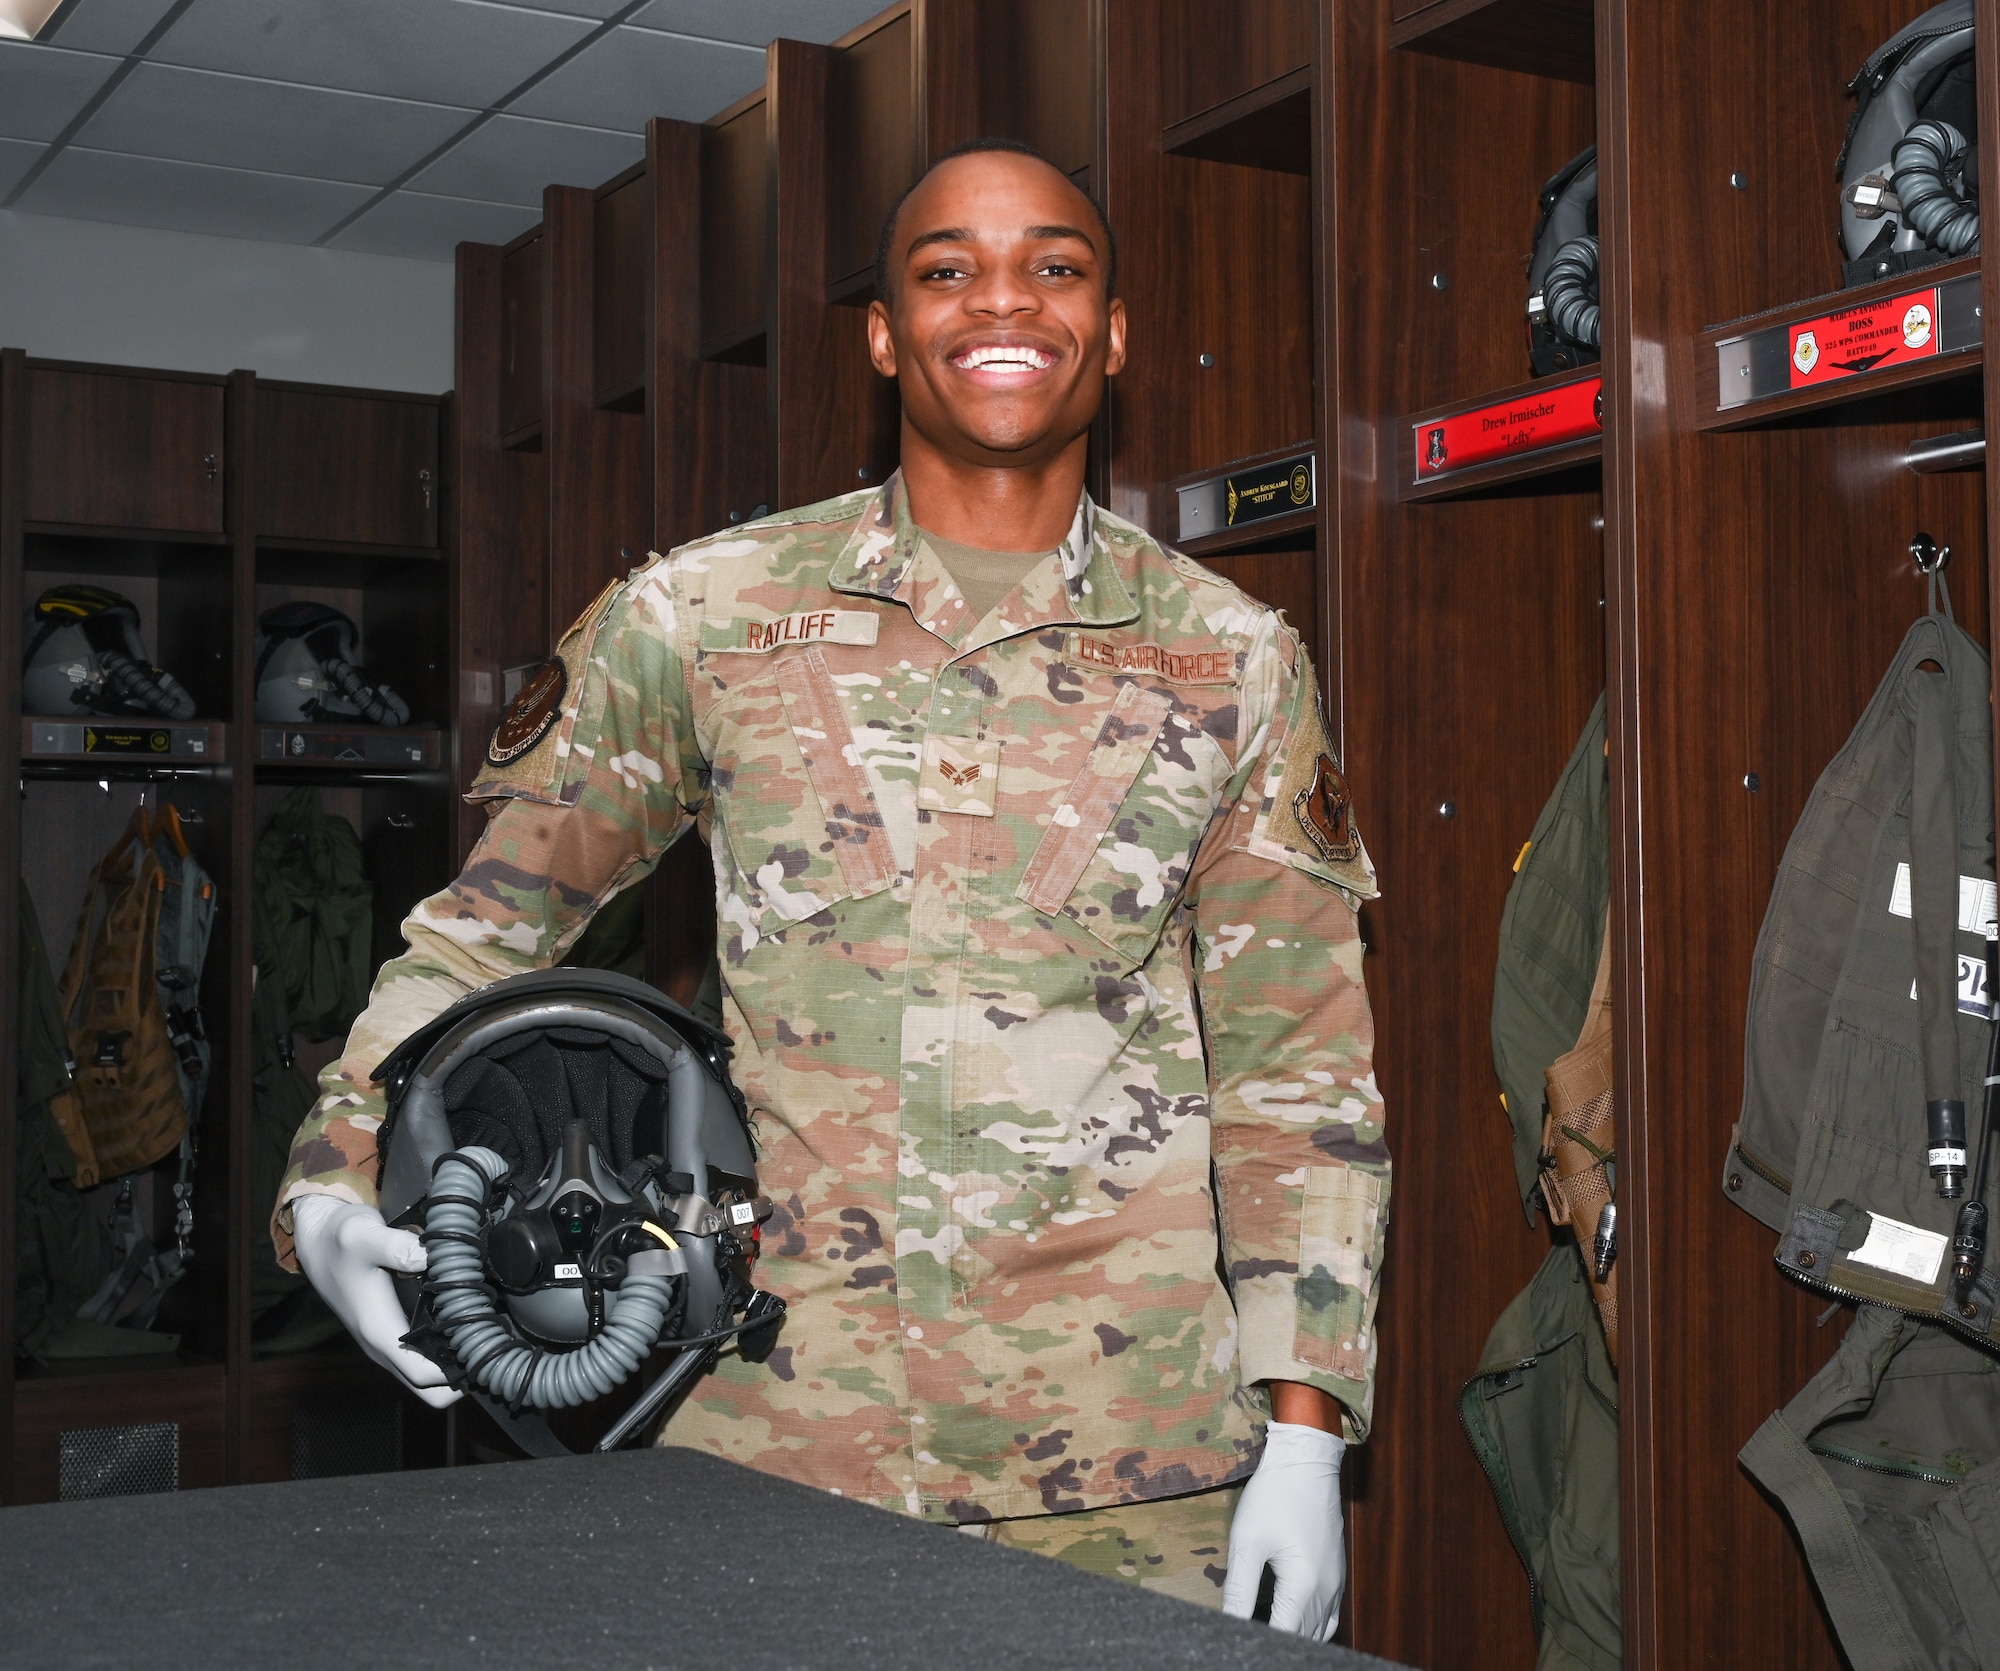 Senior Airman Anthony Ratliff, Aircrew Flight Equipment journeyman, assigned to the  509th Operations Support Squadron, poses for a photo at Whiteman Air Force Base, Missouri, Feb. 13, 2023. Ratliff will be temporarily separating from the Air Force to attend college and the Air Force Reserve Officers’ Training Corps program at Texas State University. (U.S. Air Force photo by Airman 1st Class Hailey Farrell)